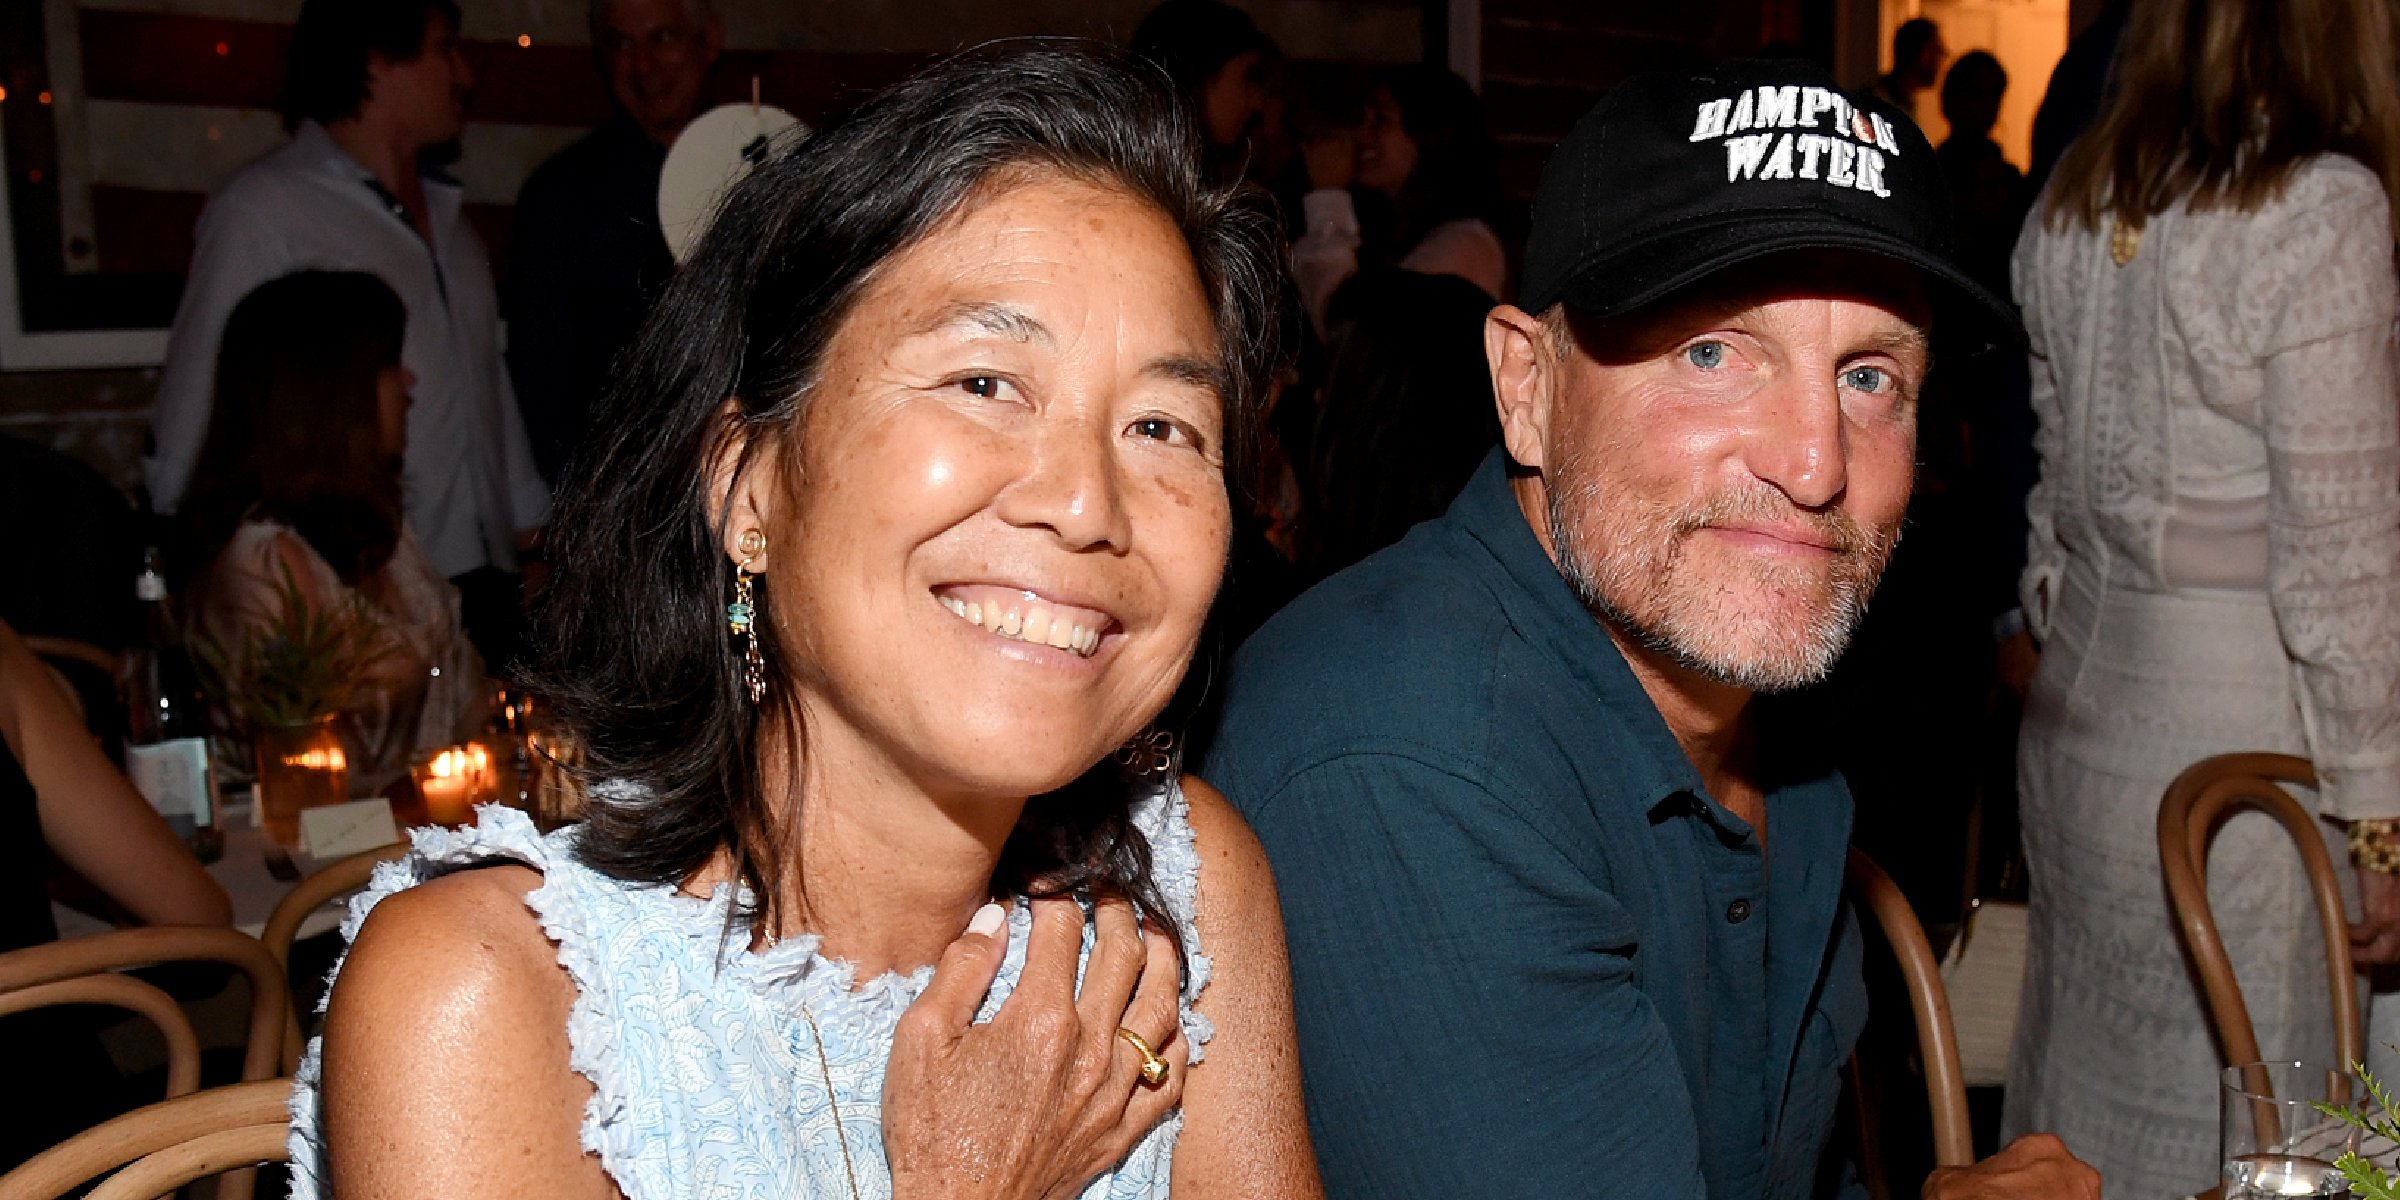 Linda Louie and Woody Harrelson. | Source: Getty Images